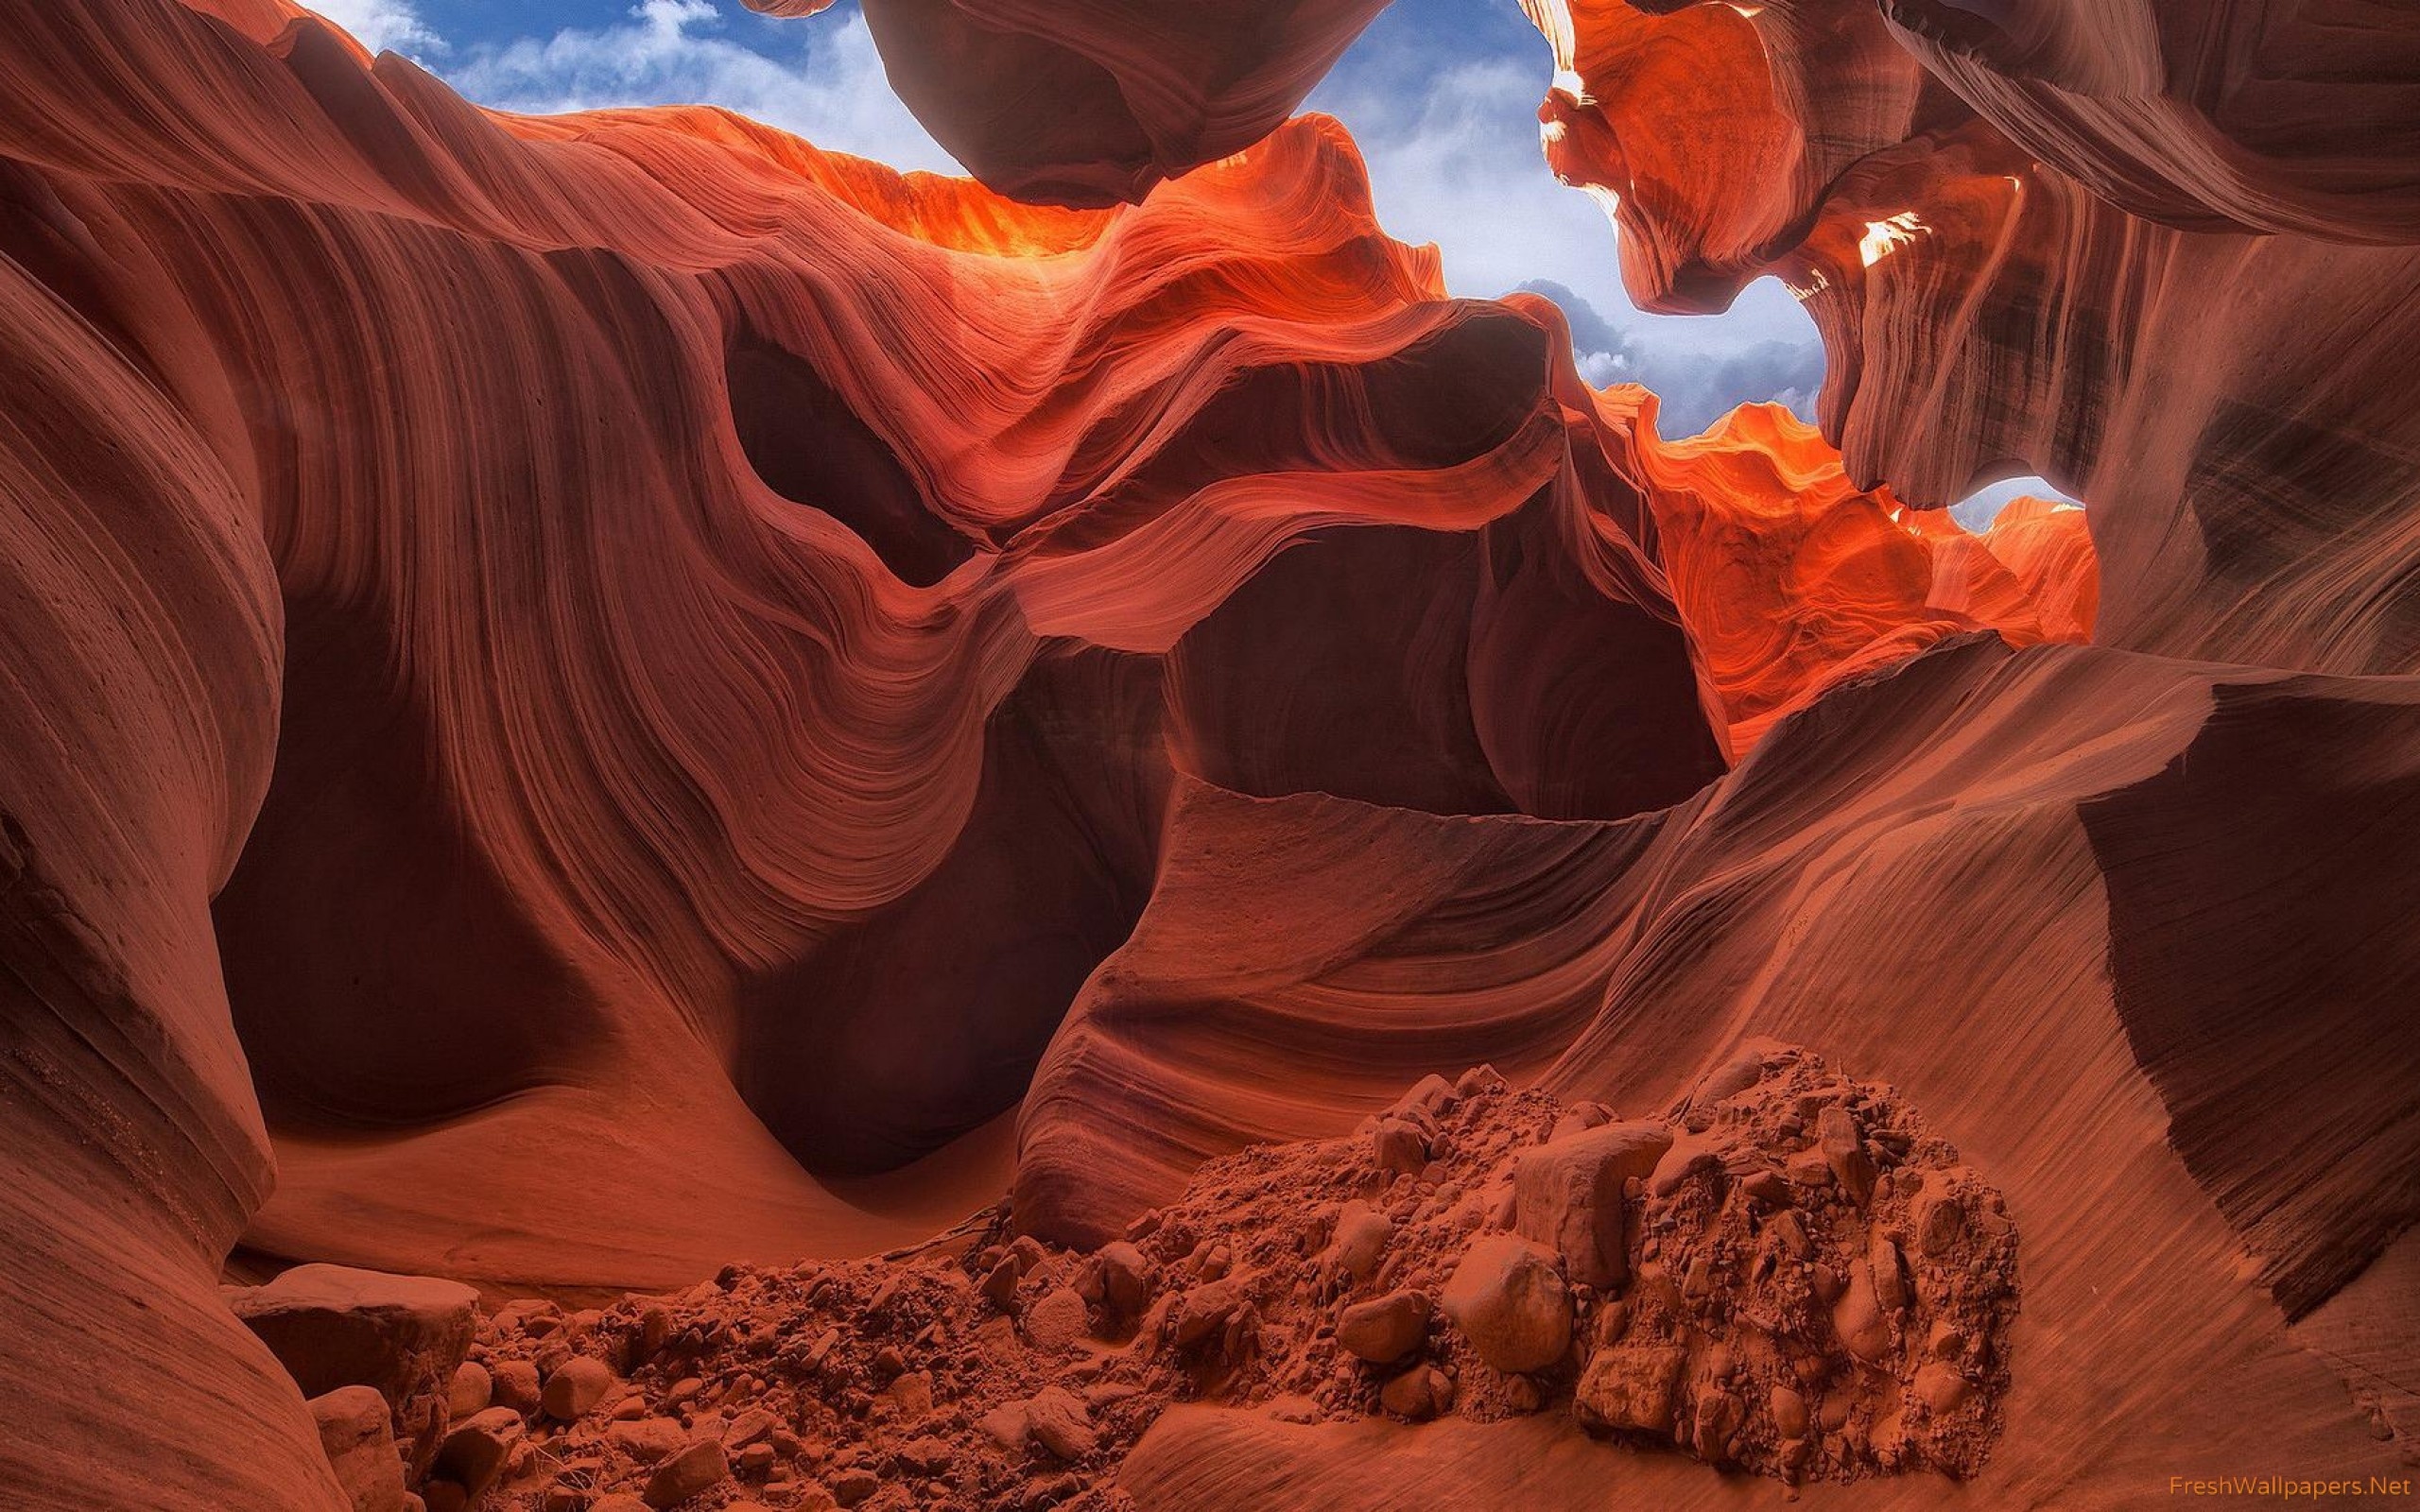 Antelope Canyon wallpapers, Posted by Samantha Anderson, Beautiful backgrounds, Mesmerizing sceneries, 2560x1600 HD Desktop